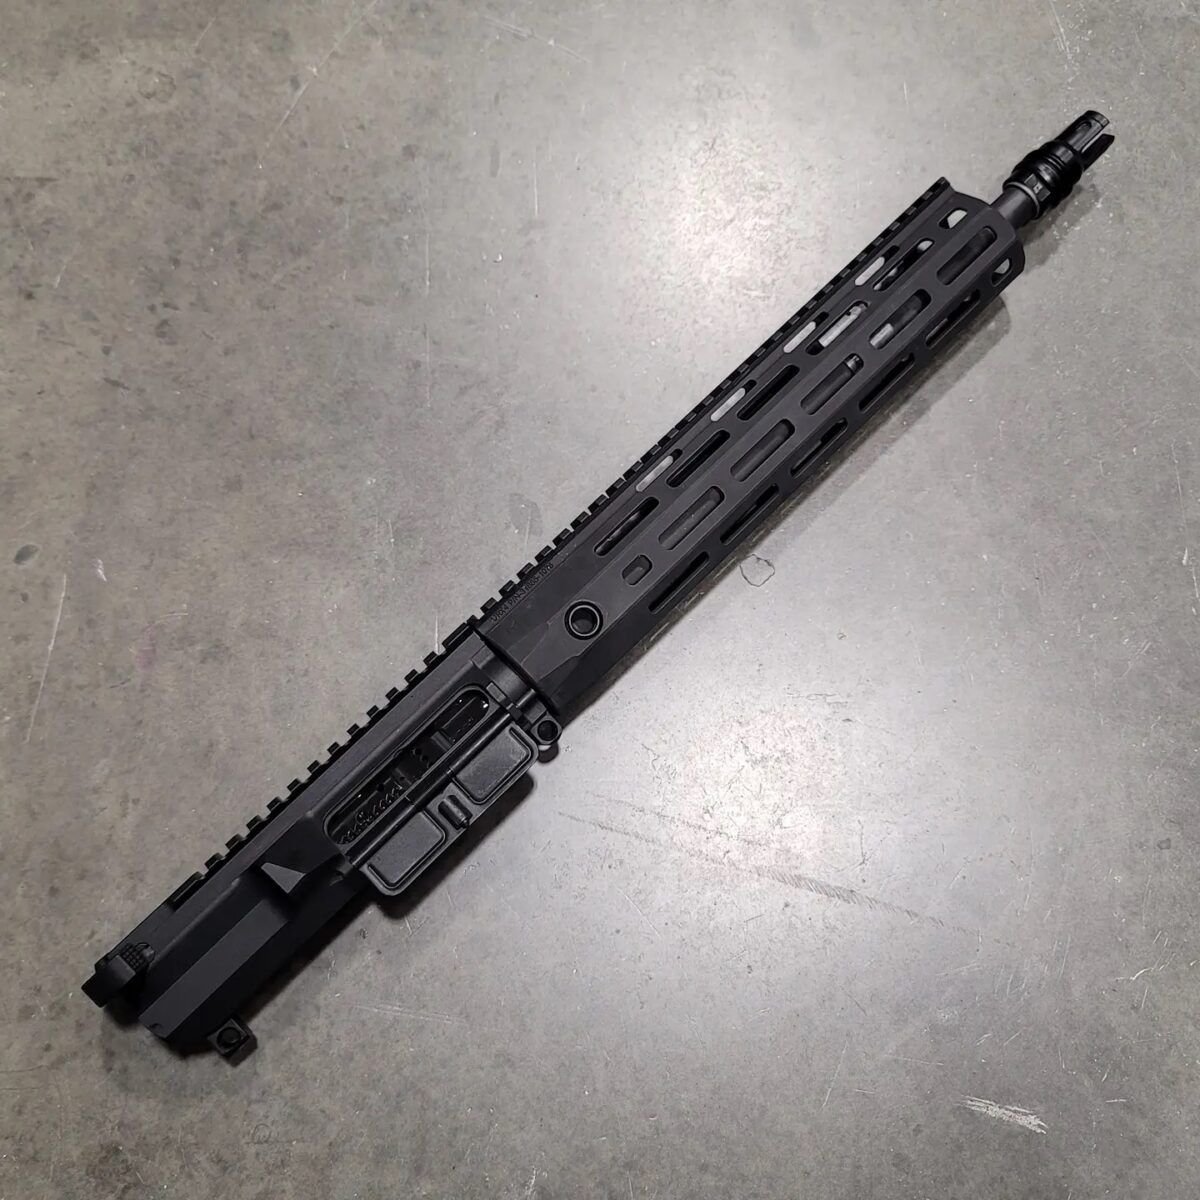 ARBuildJunkie contributor Todd Gimian gives us insights on things he's learned working at Trajectory Arms, and how you use those lessons to improve your skills and build a better AR.